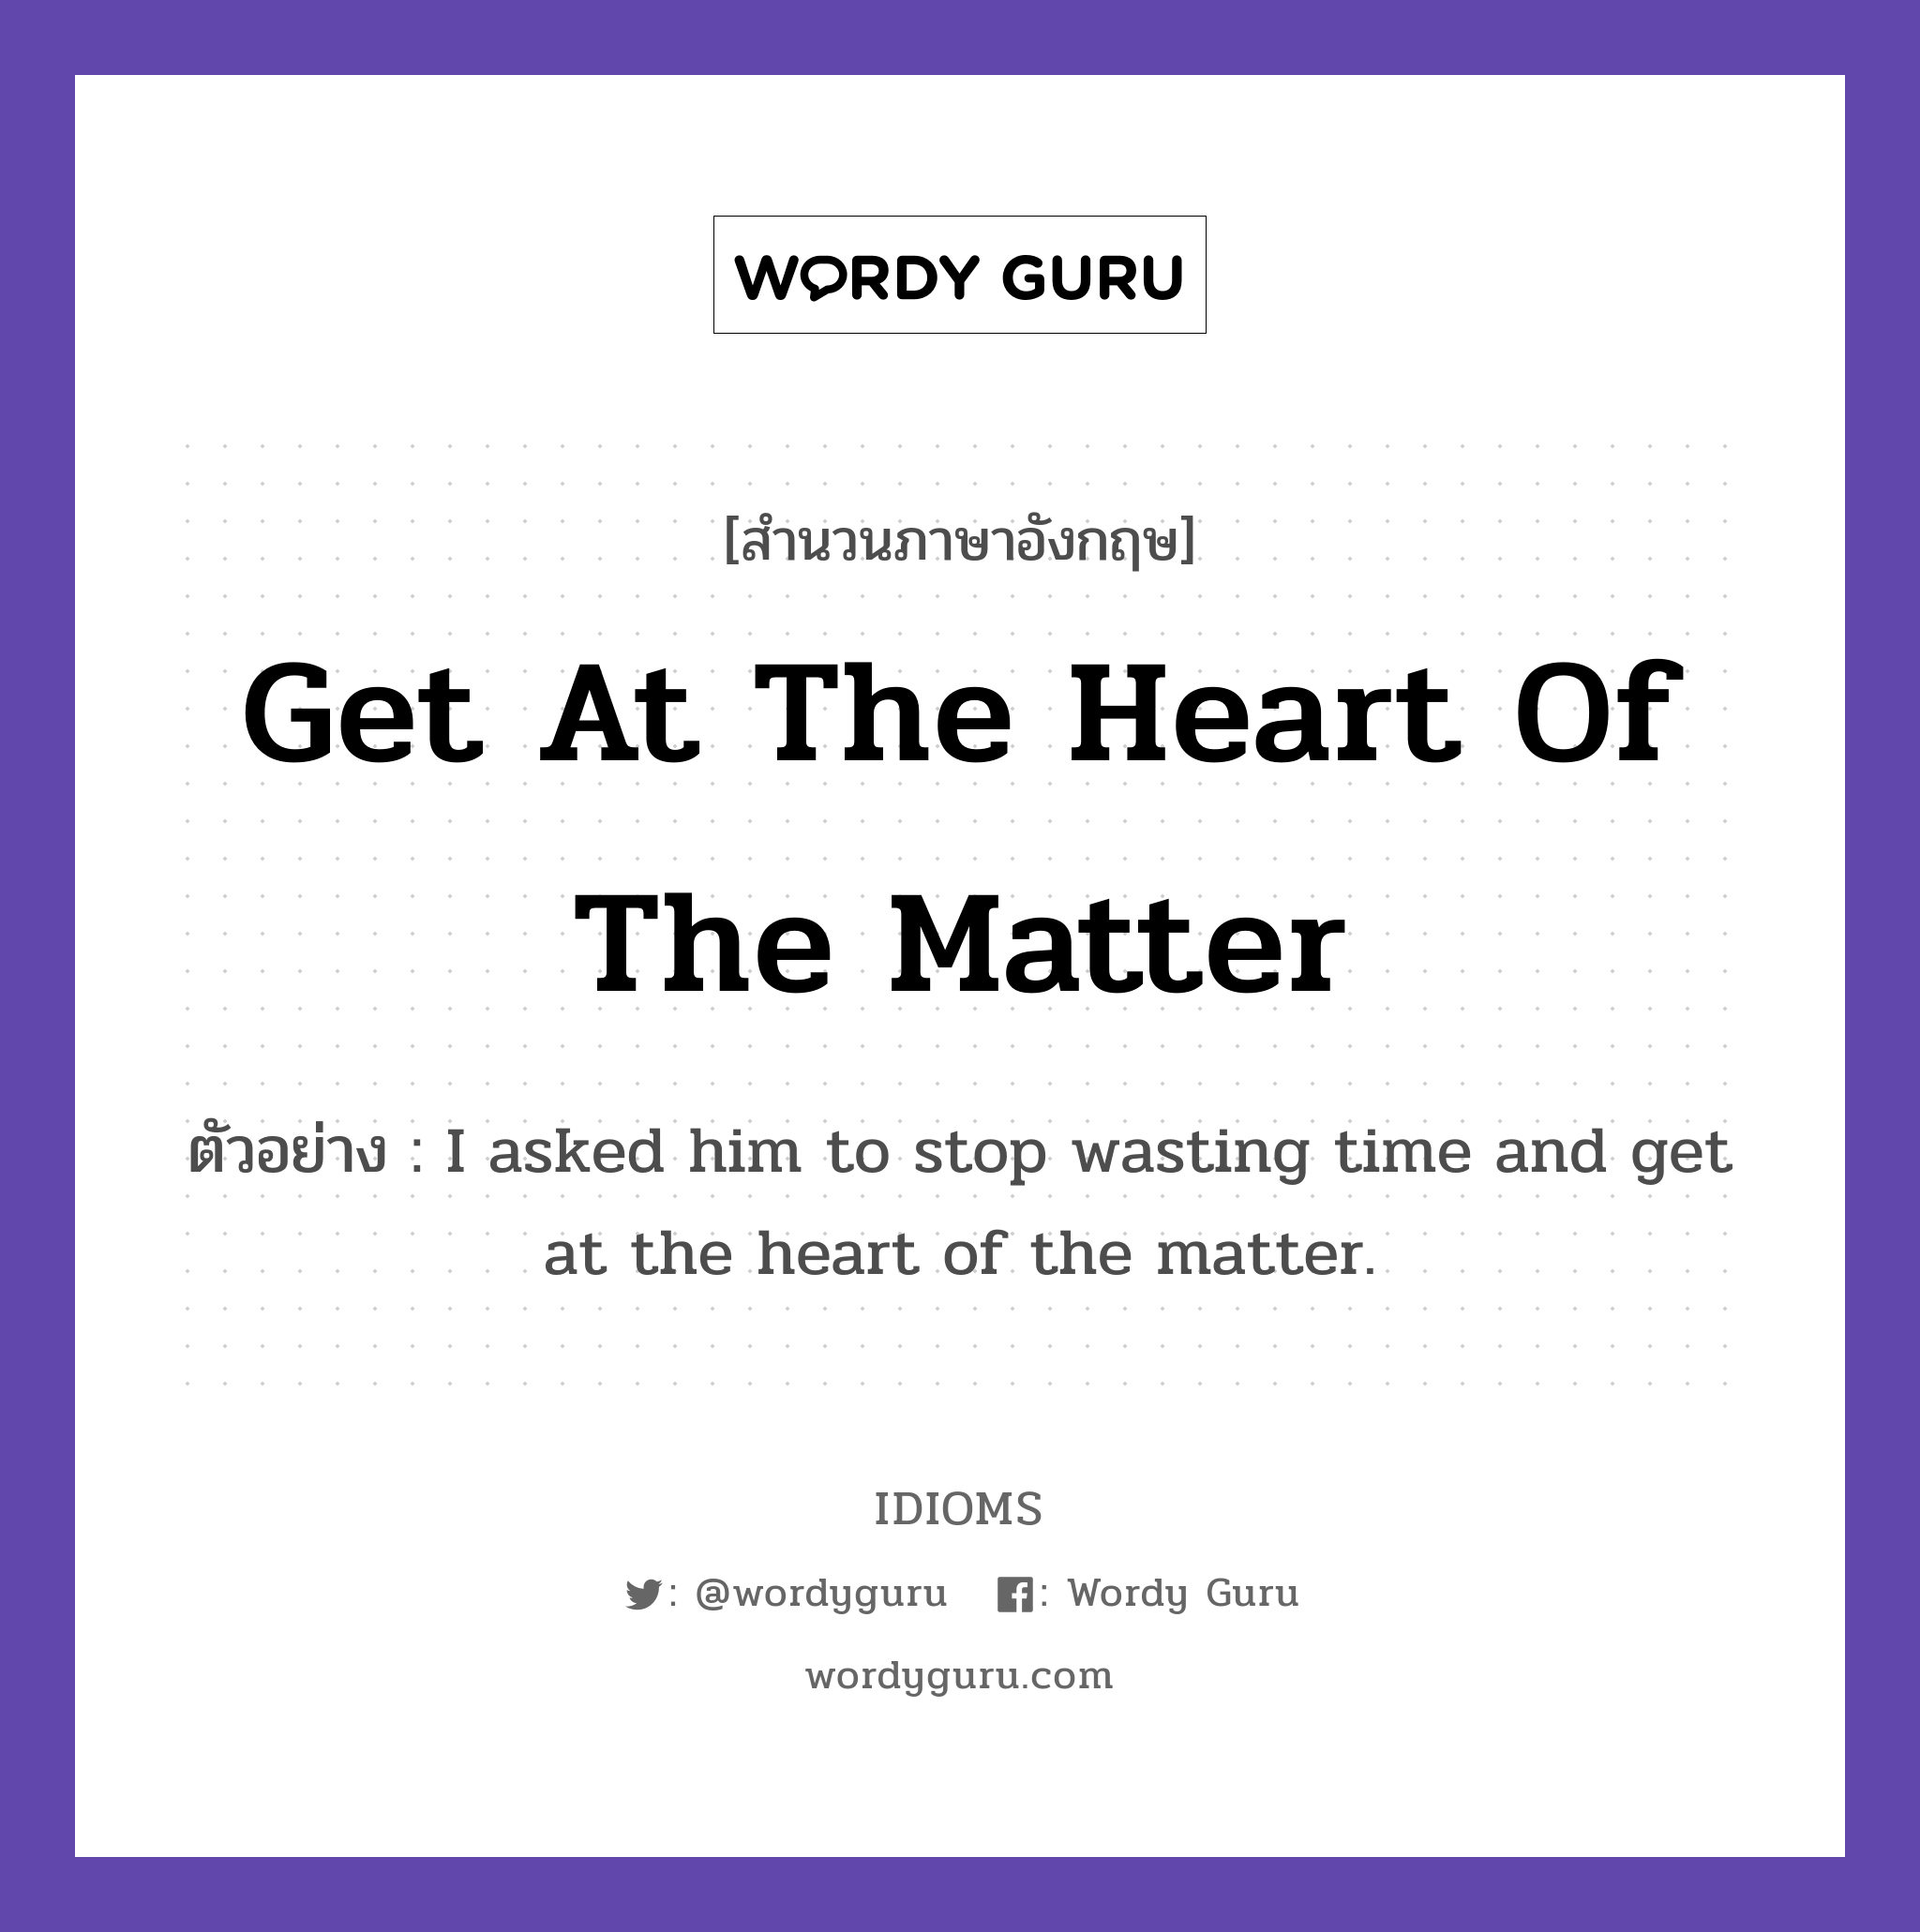 Get At The Heart Of The Matter แปลว่า?, สำนวนภาษาอังกฤษ Get At The Heart Of The Matter ตัวอย่าง I asked him to stop wasting time and get at the heart of the matter.